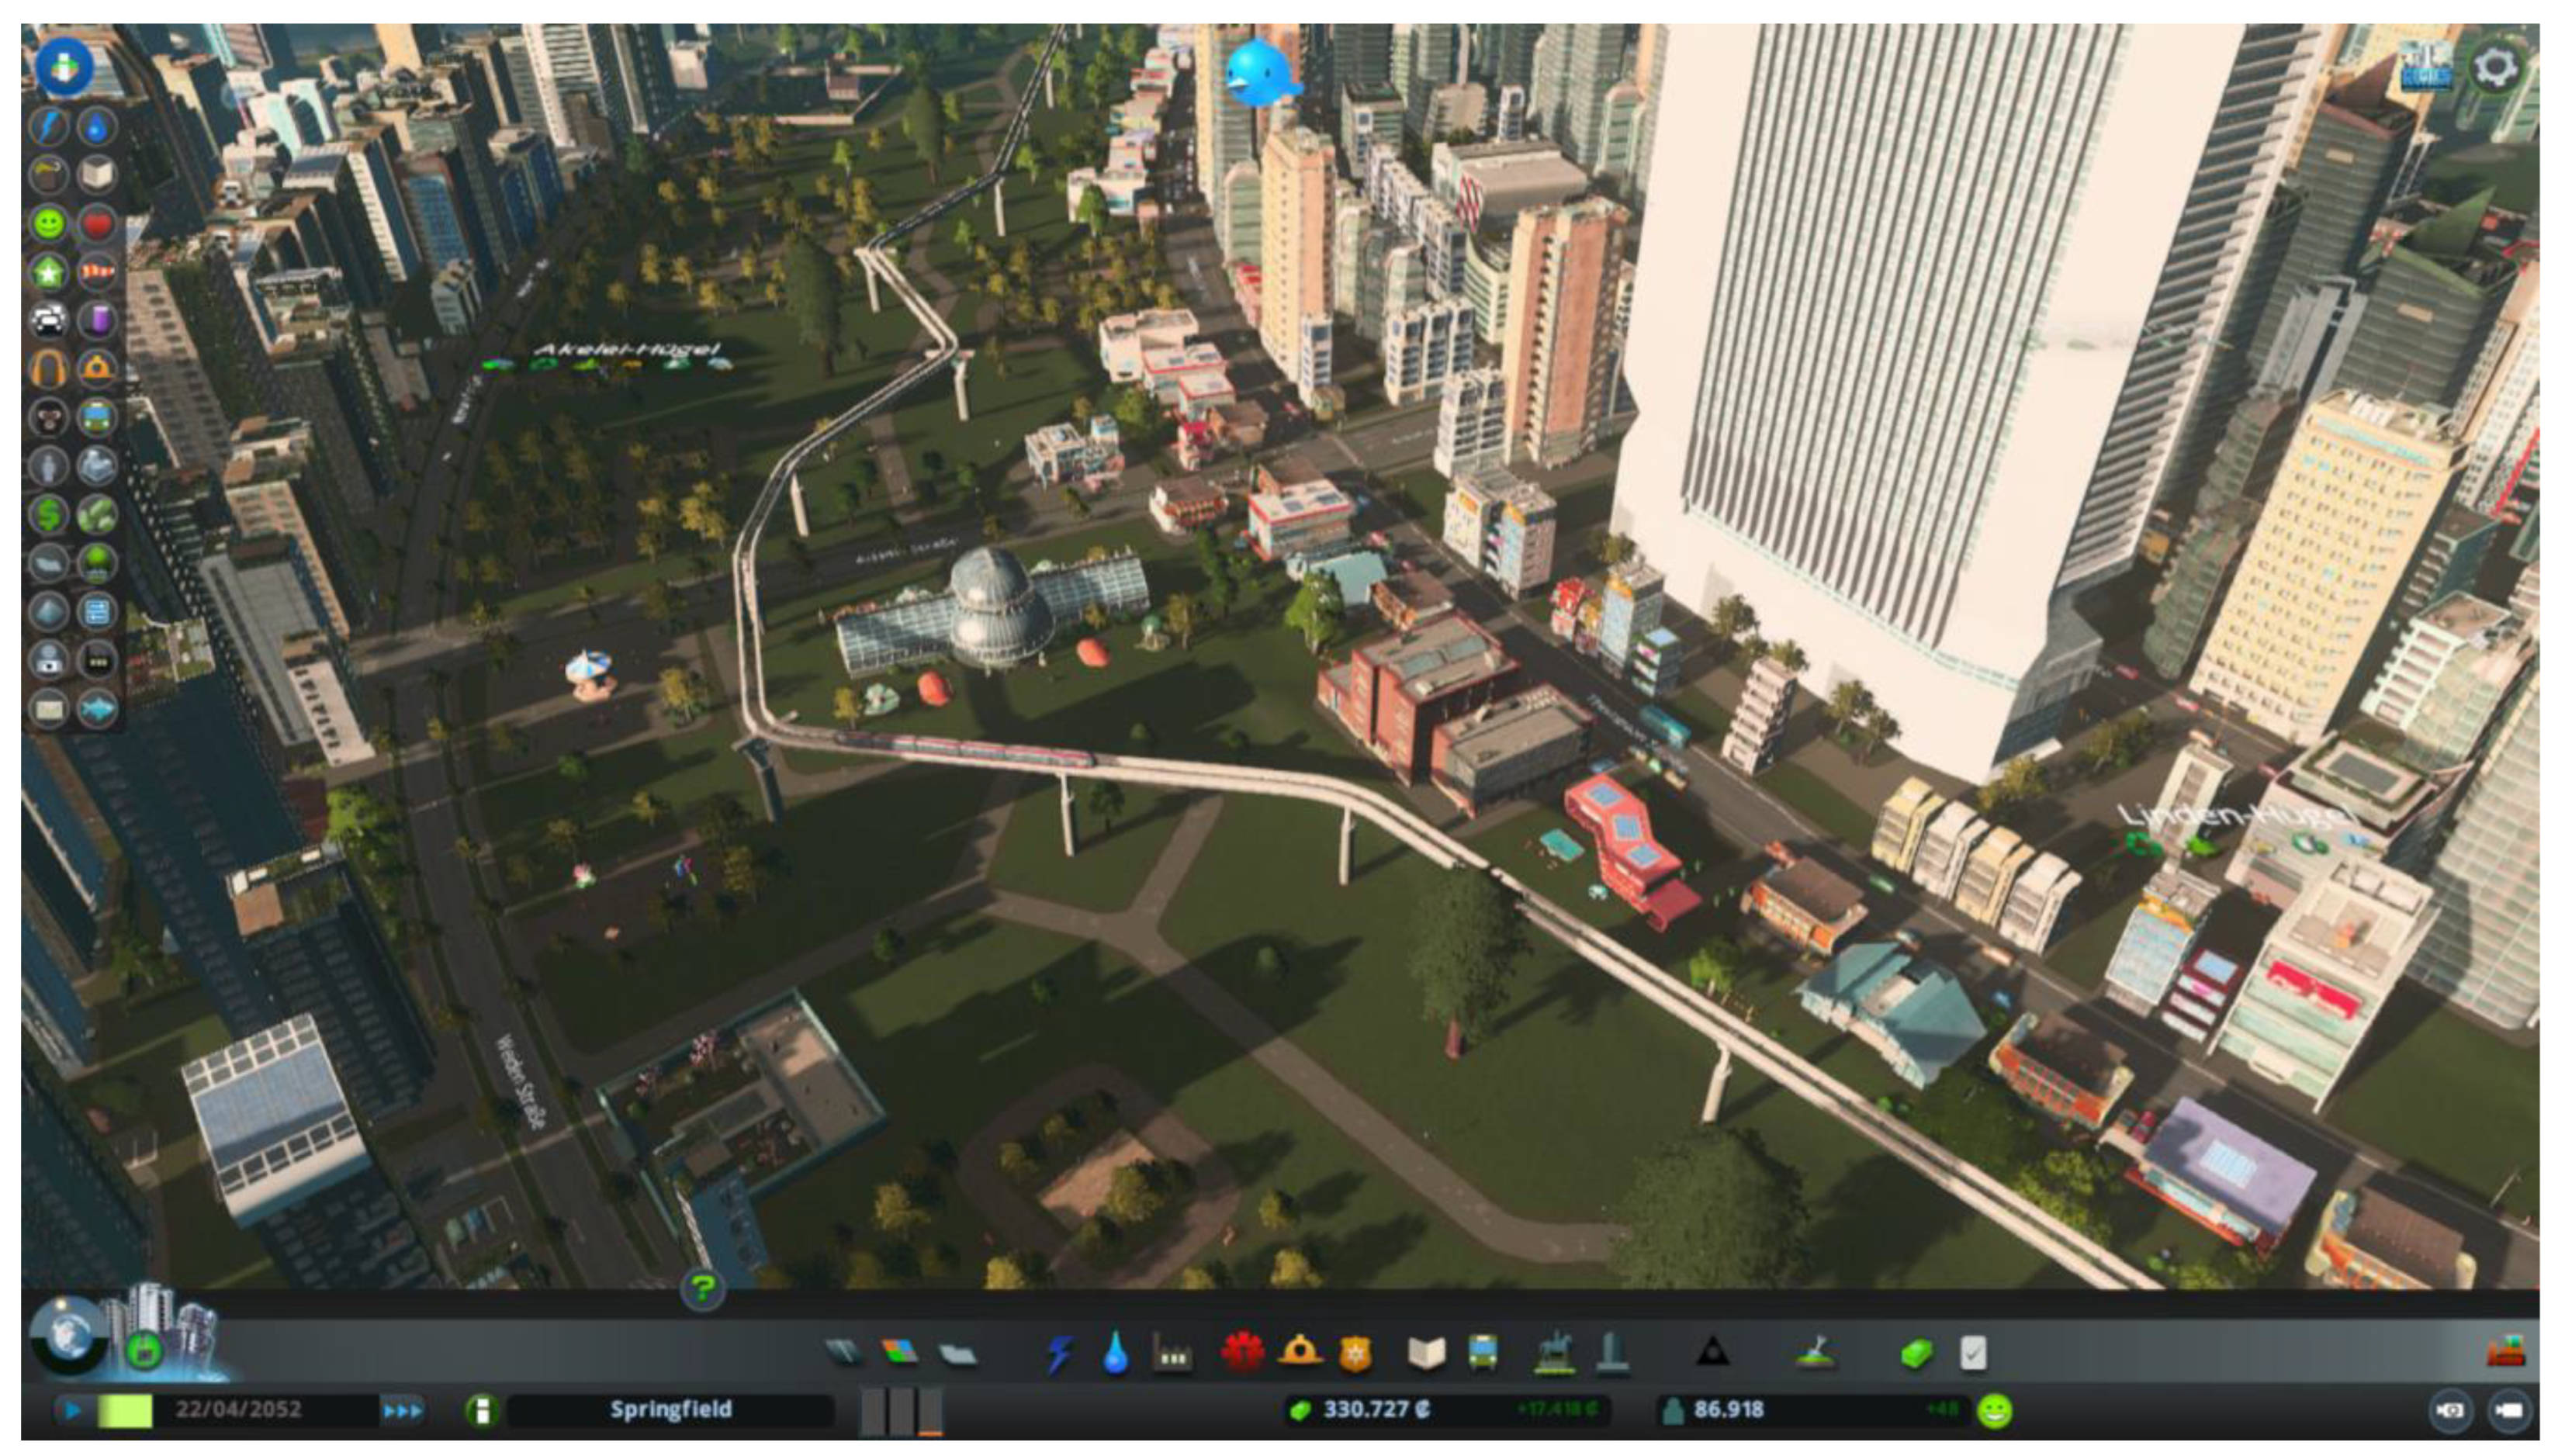 Cities: Skylines 2 Economy and Production Featured in New Gameplay